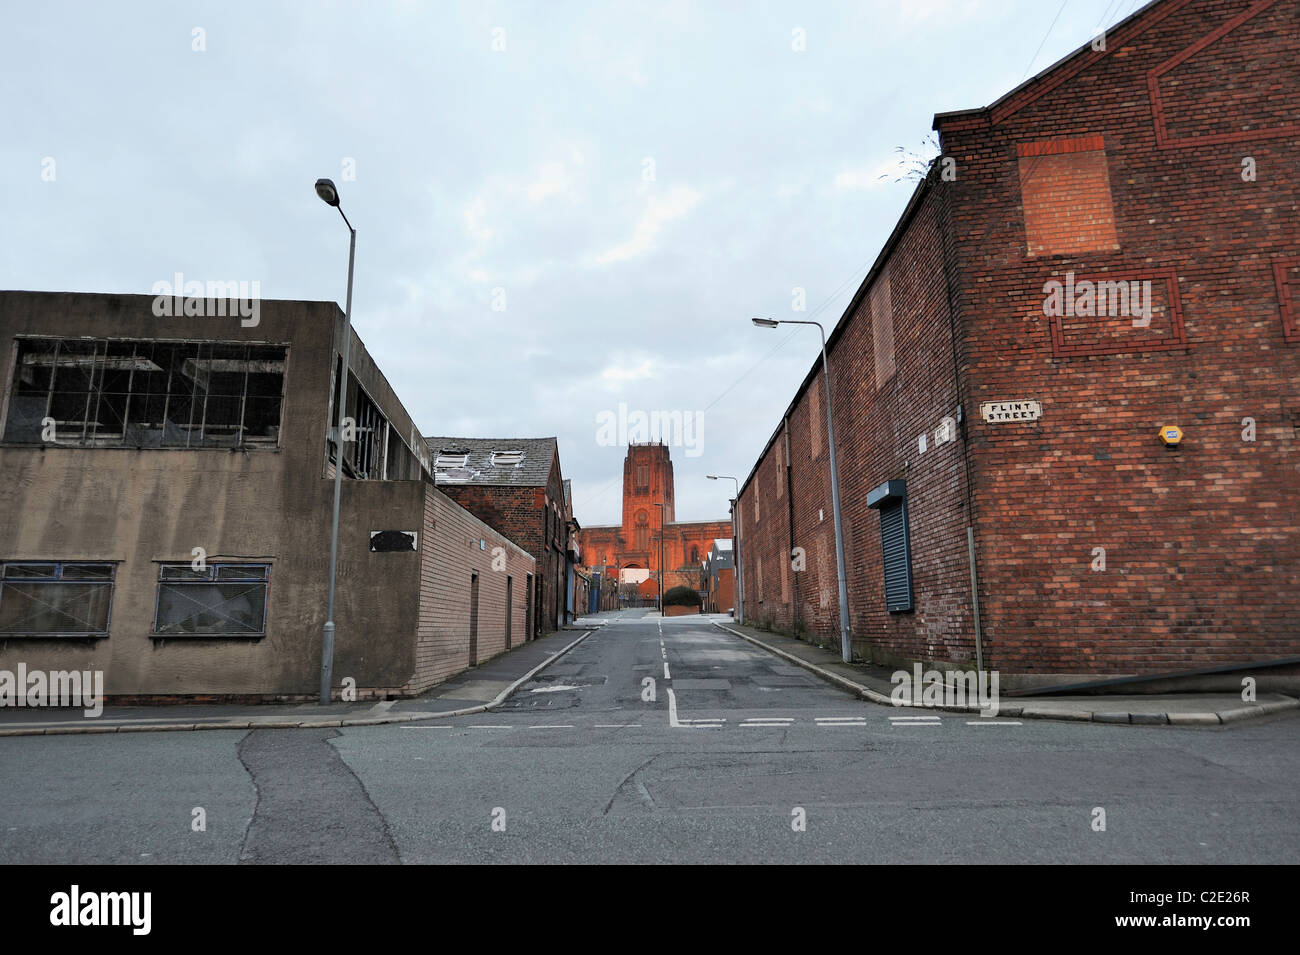 Looking up Brick Street from Flint Street in Toxteth, Liverpool. A run down area, once a service area for the Liverpool Docks. Stock Photo